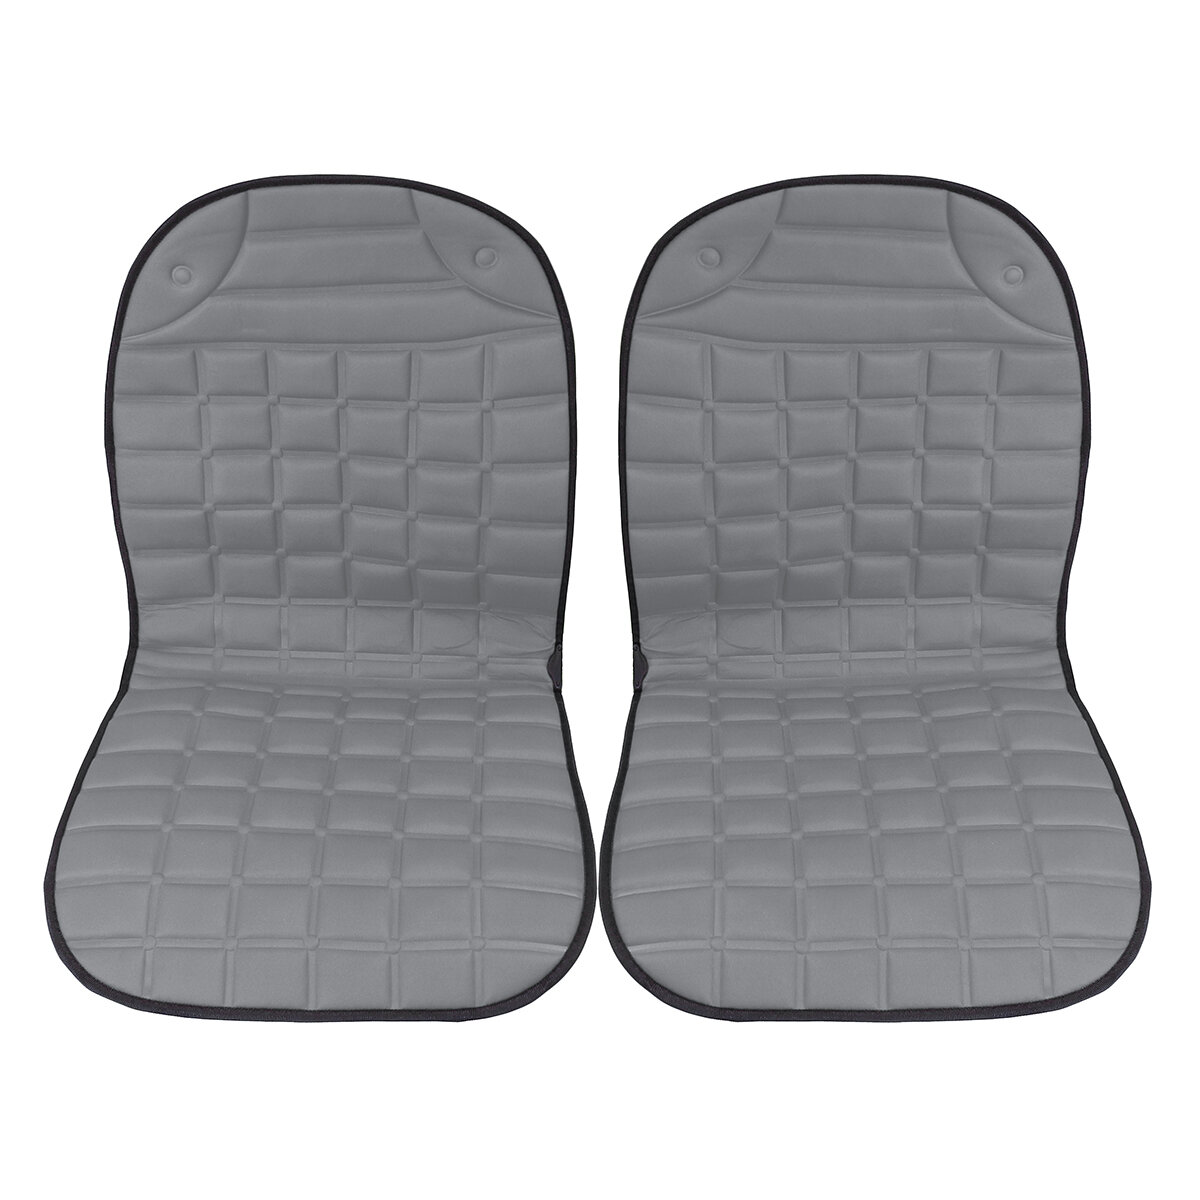 12V Cotton Car Double Seat Heated Cushion Seat Warmer Winter Household Cover Electric Heating Mat